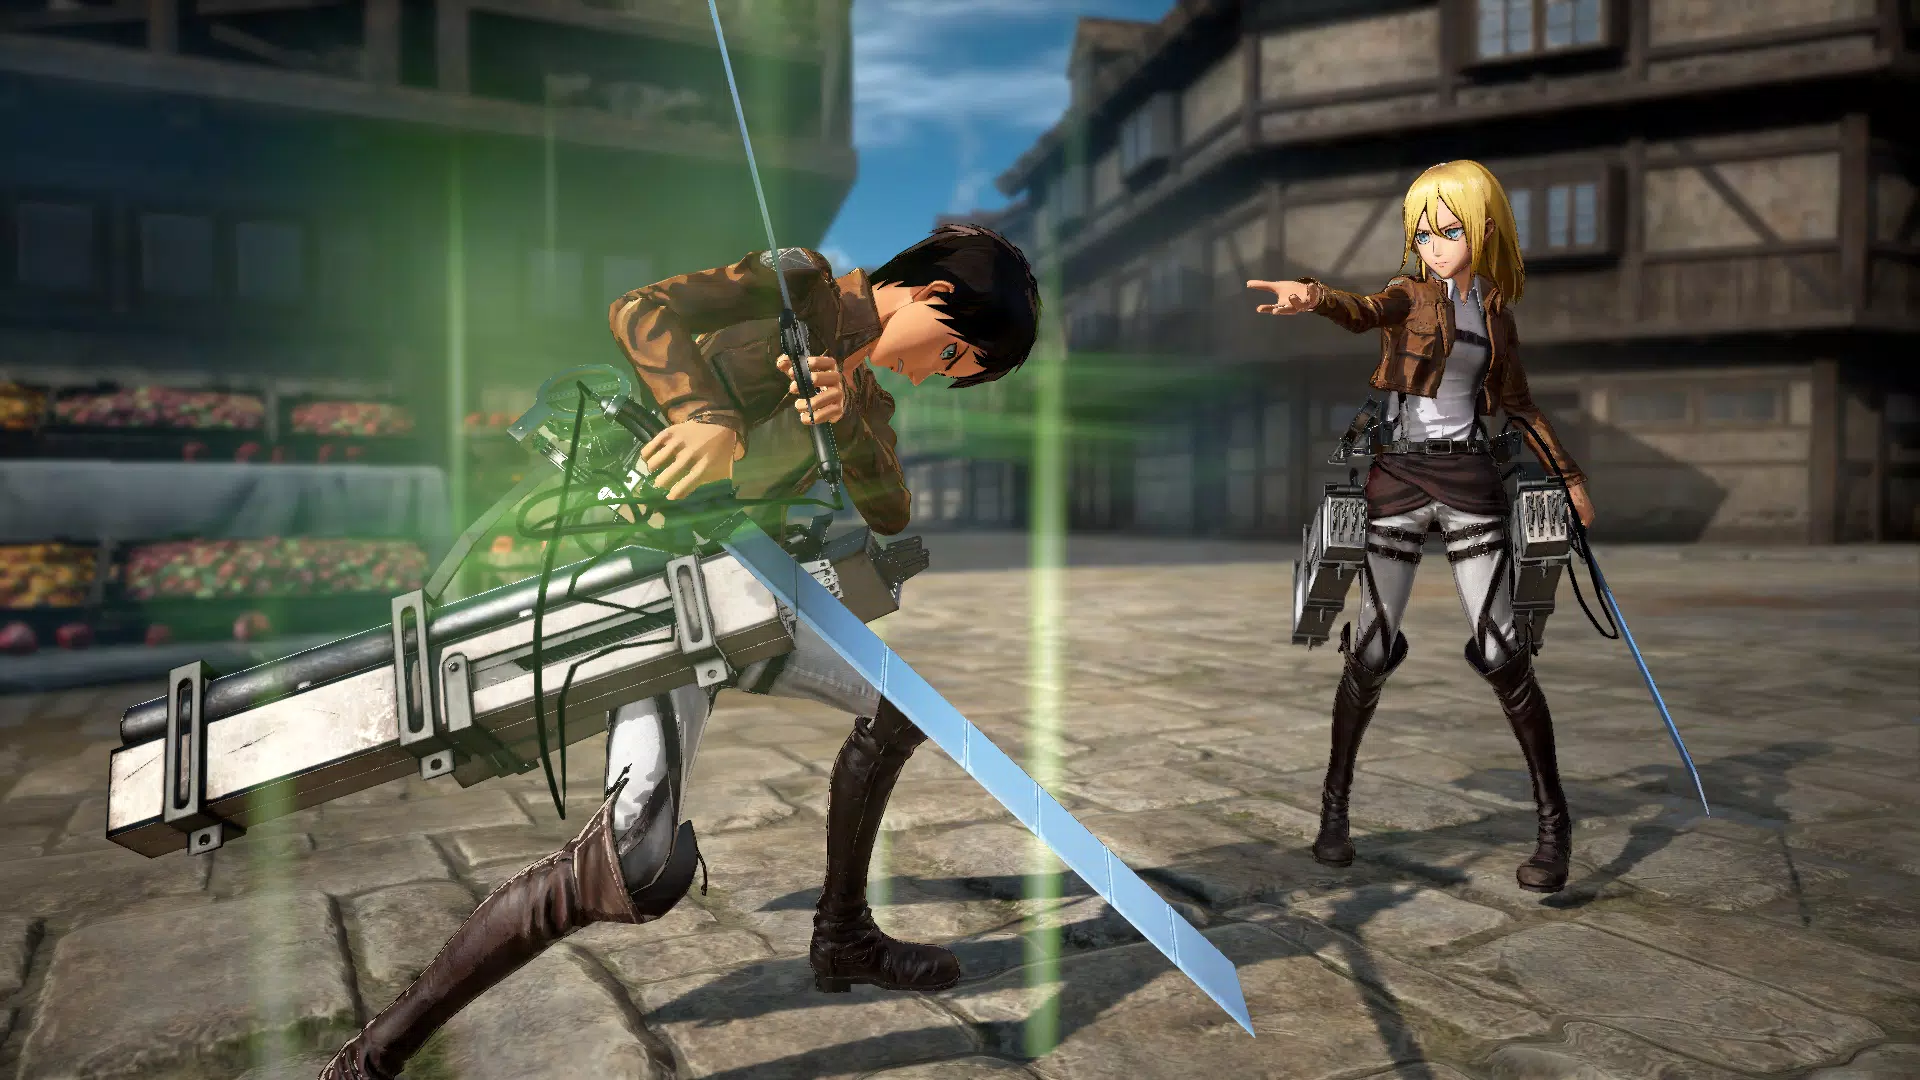 Attack On Titan 3D Game Clue Apk Download for Android- Latest version 1.0-  com.attack.aotmobile.guidetitans